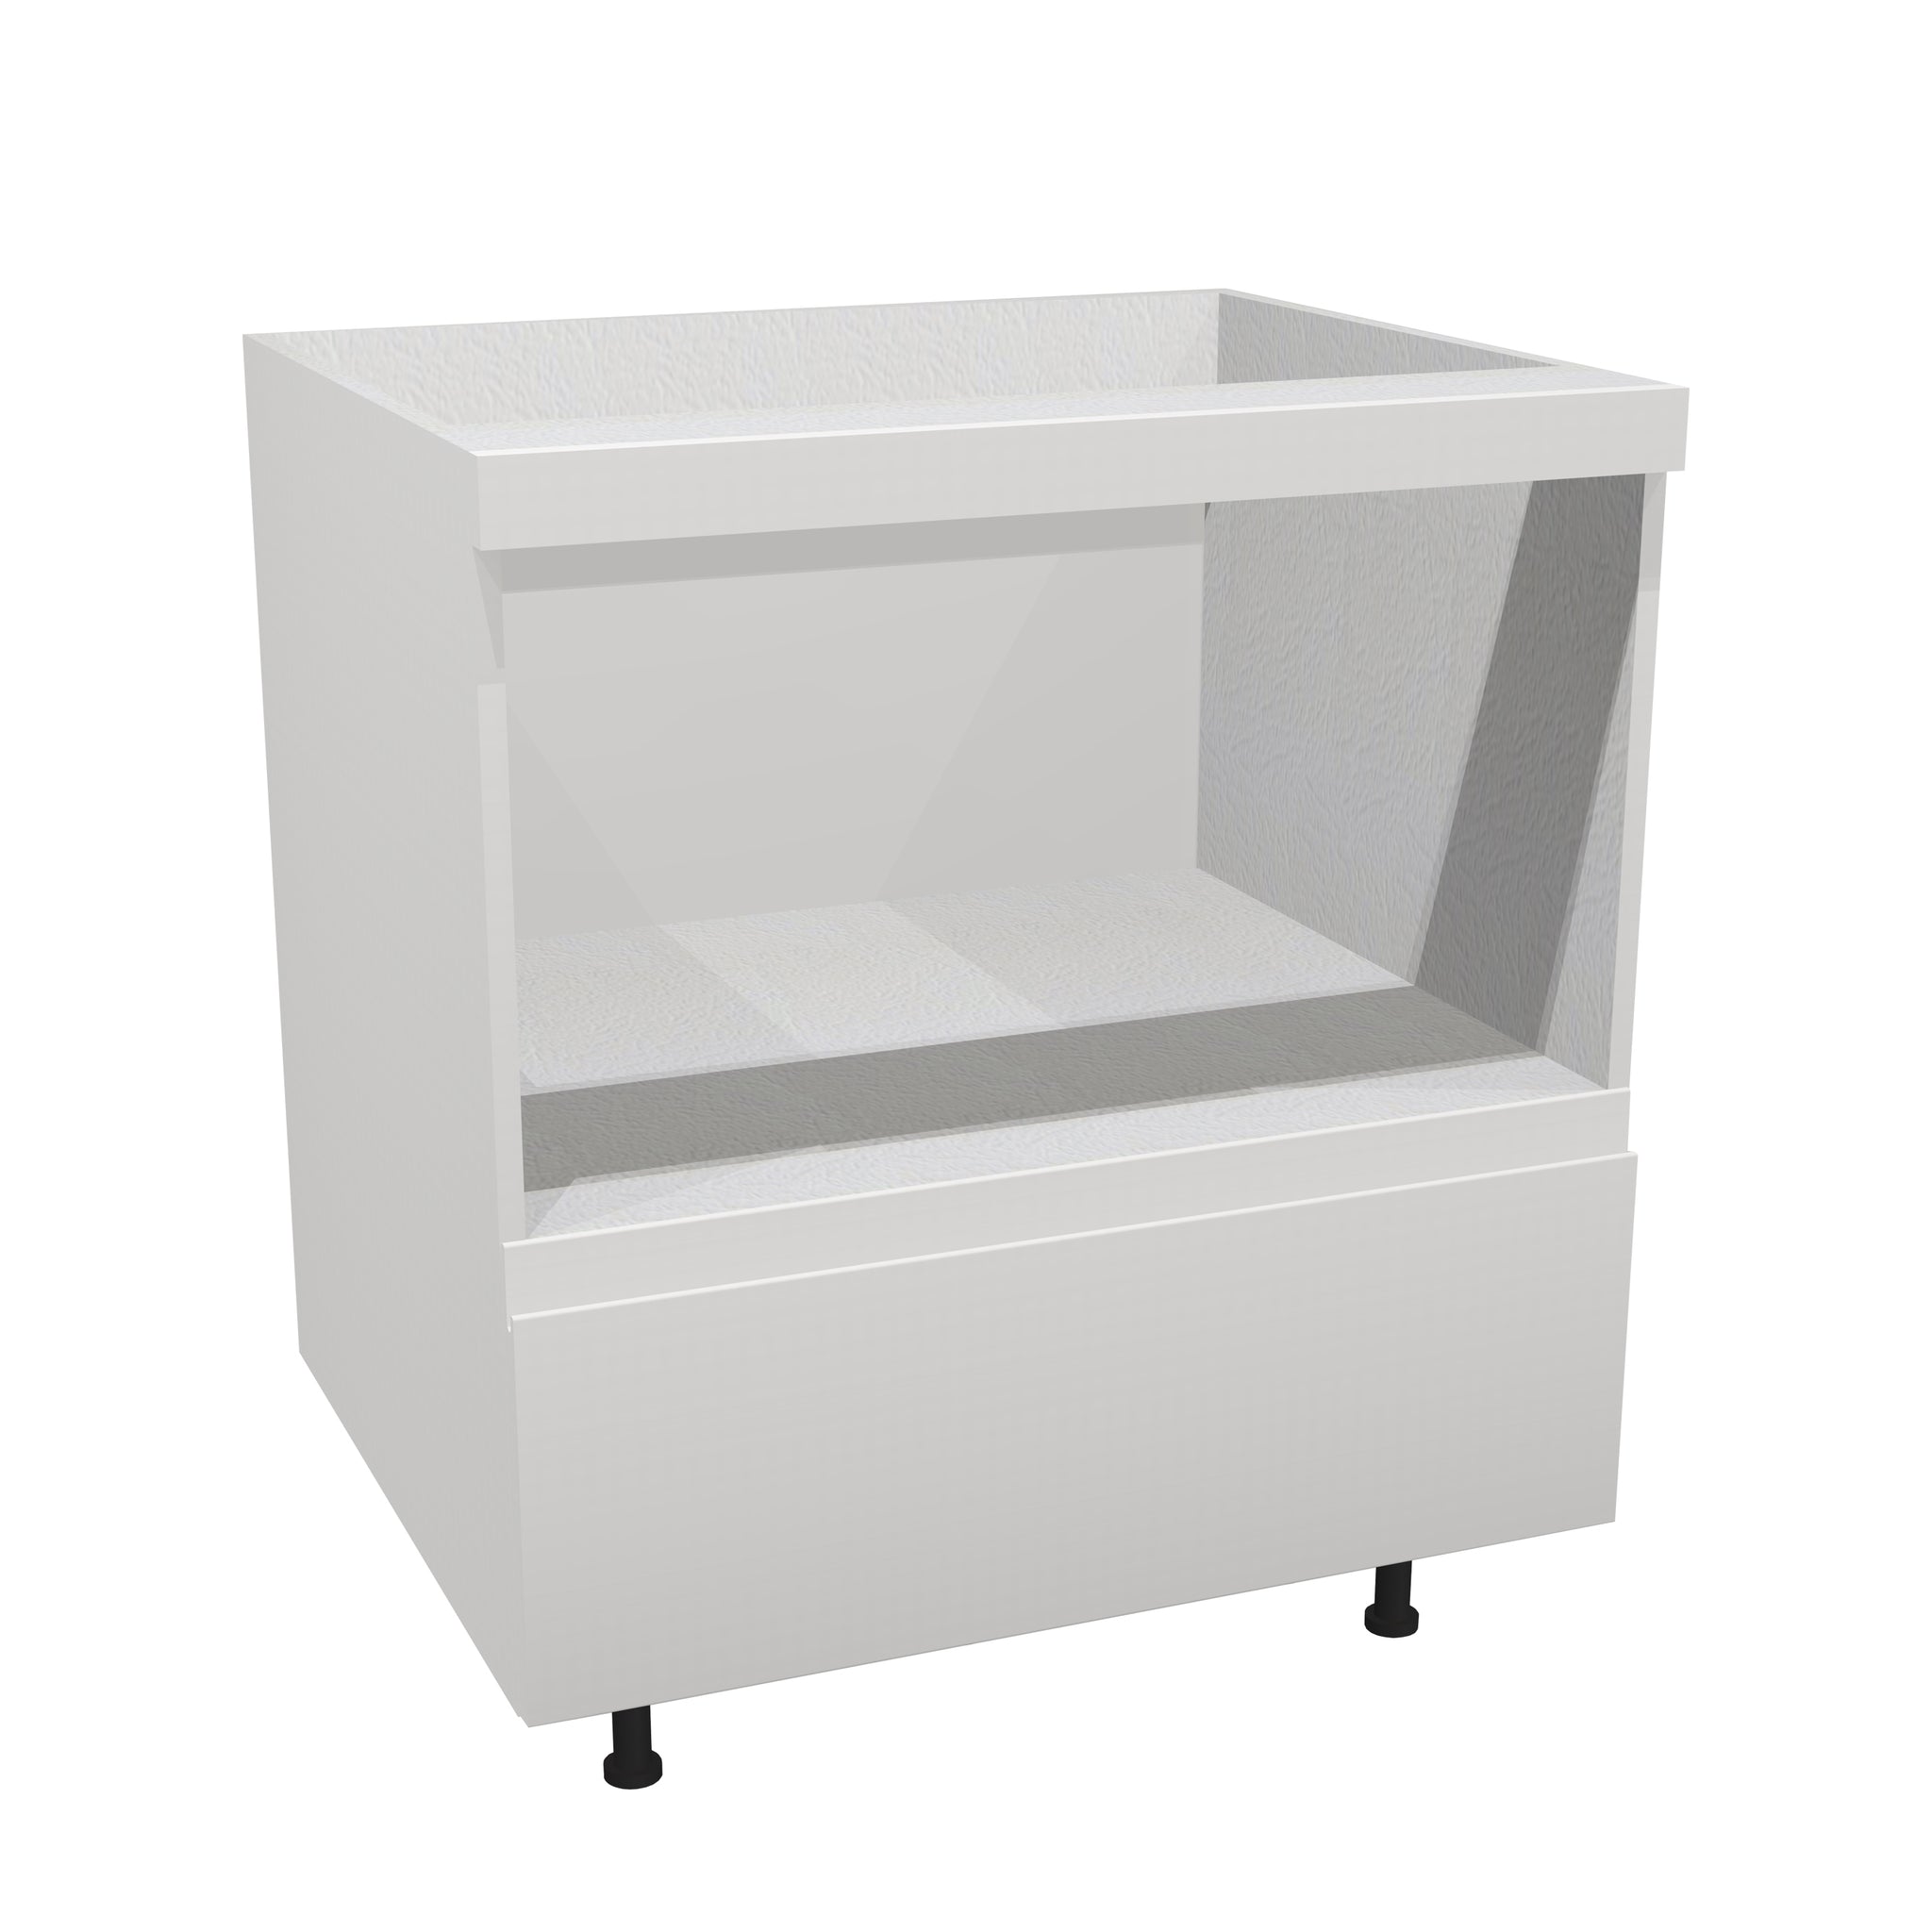 RTA - Lacquer White - Base Microwave Cabinet | 36"W x 30"H x 23.8"D